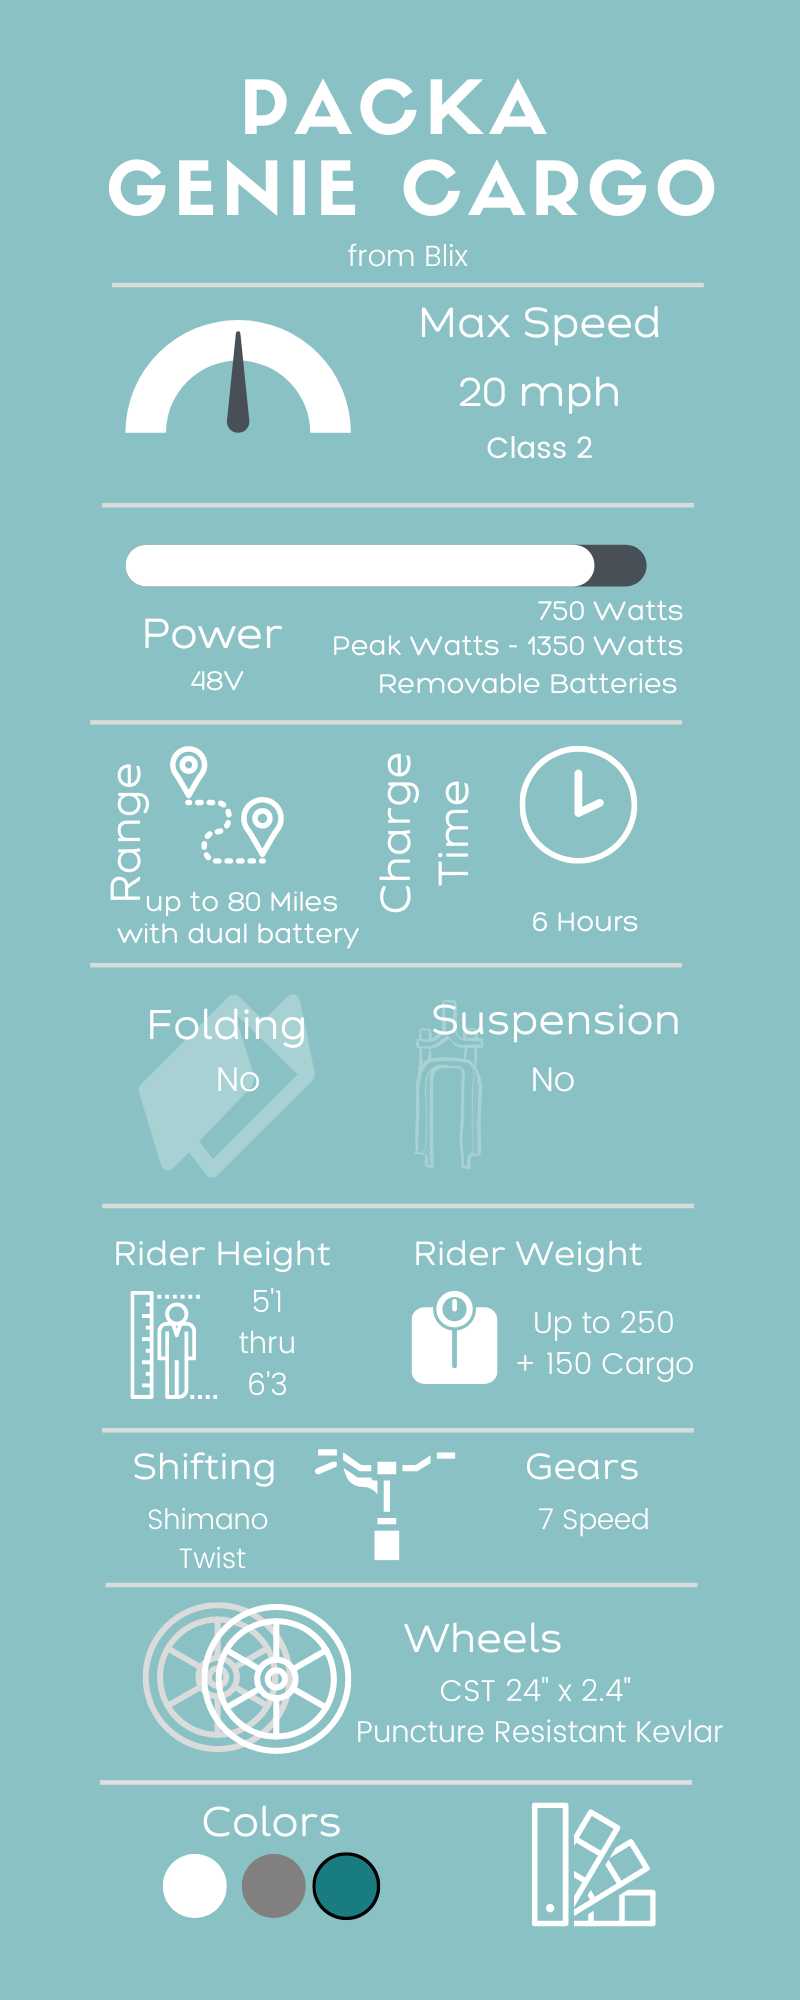 Infographic about the Blix Packa Genie eBike that is compatible with the Go4-E Connection Kit to create a Blackbird Bikes Sociable Tandem side-by-side quadribike. This 4 wheel bicycle offers a stable ride inclusive for all abilities and adaptive to special needs riders.